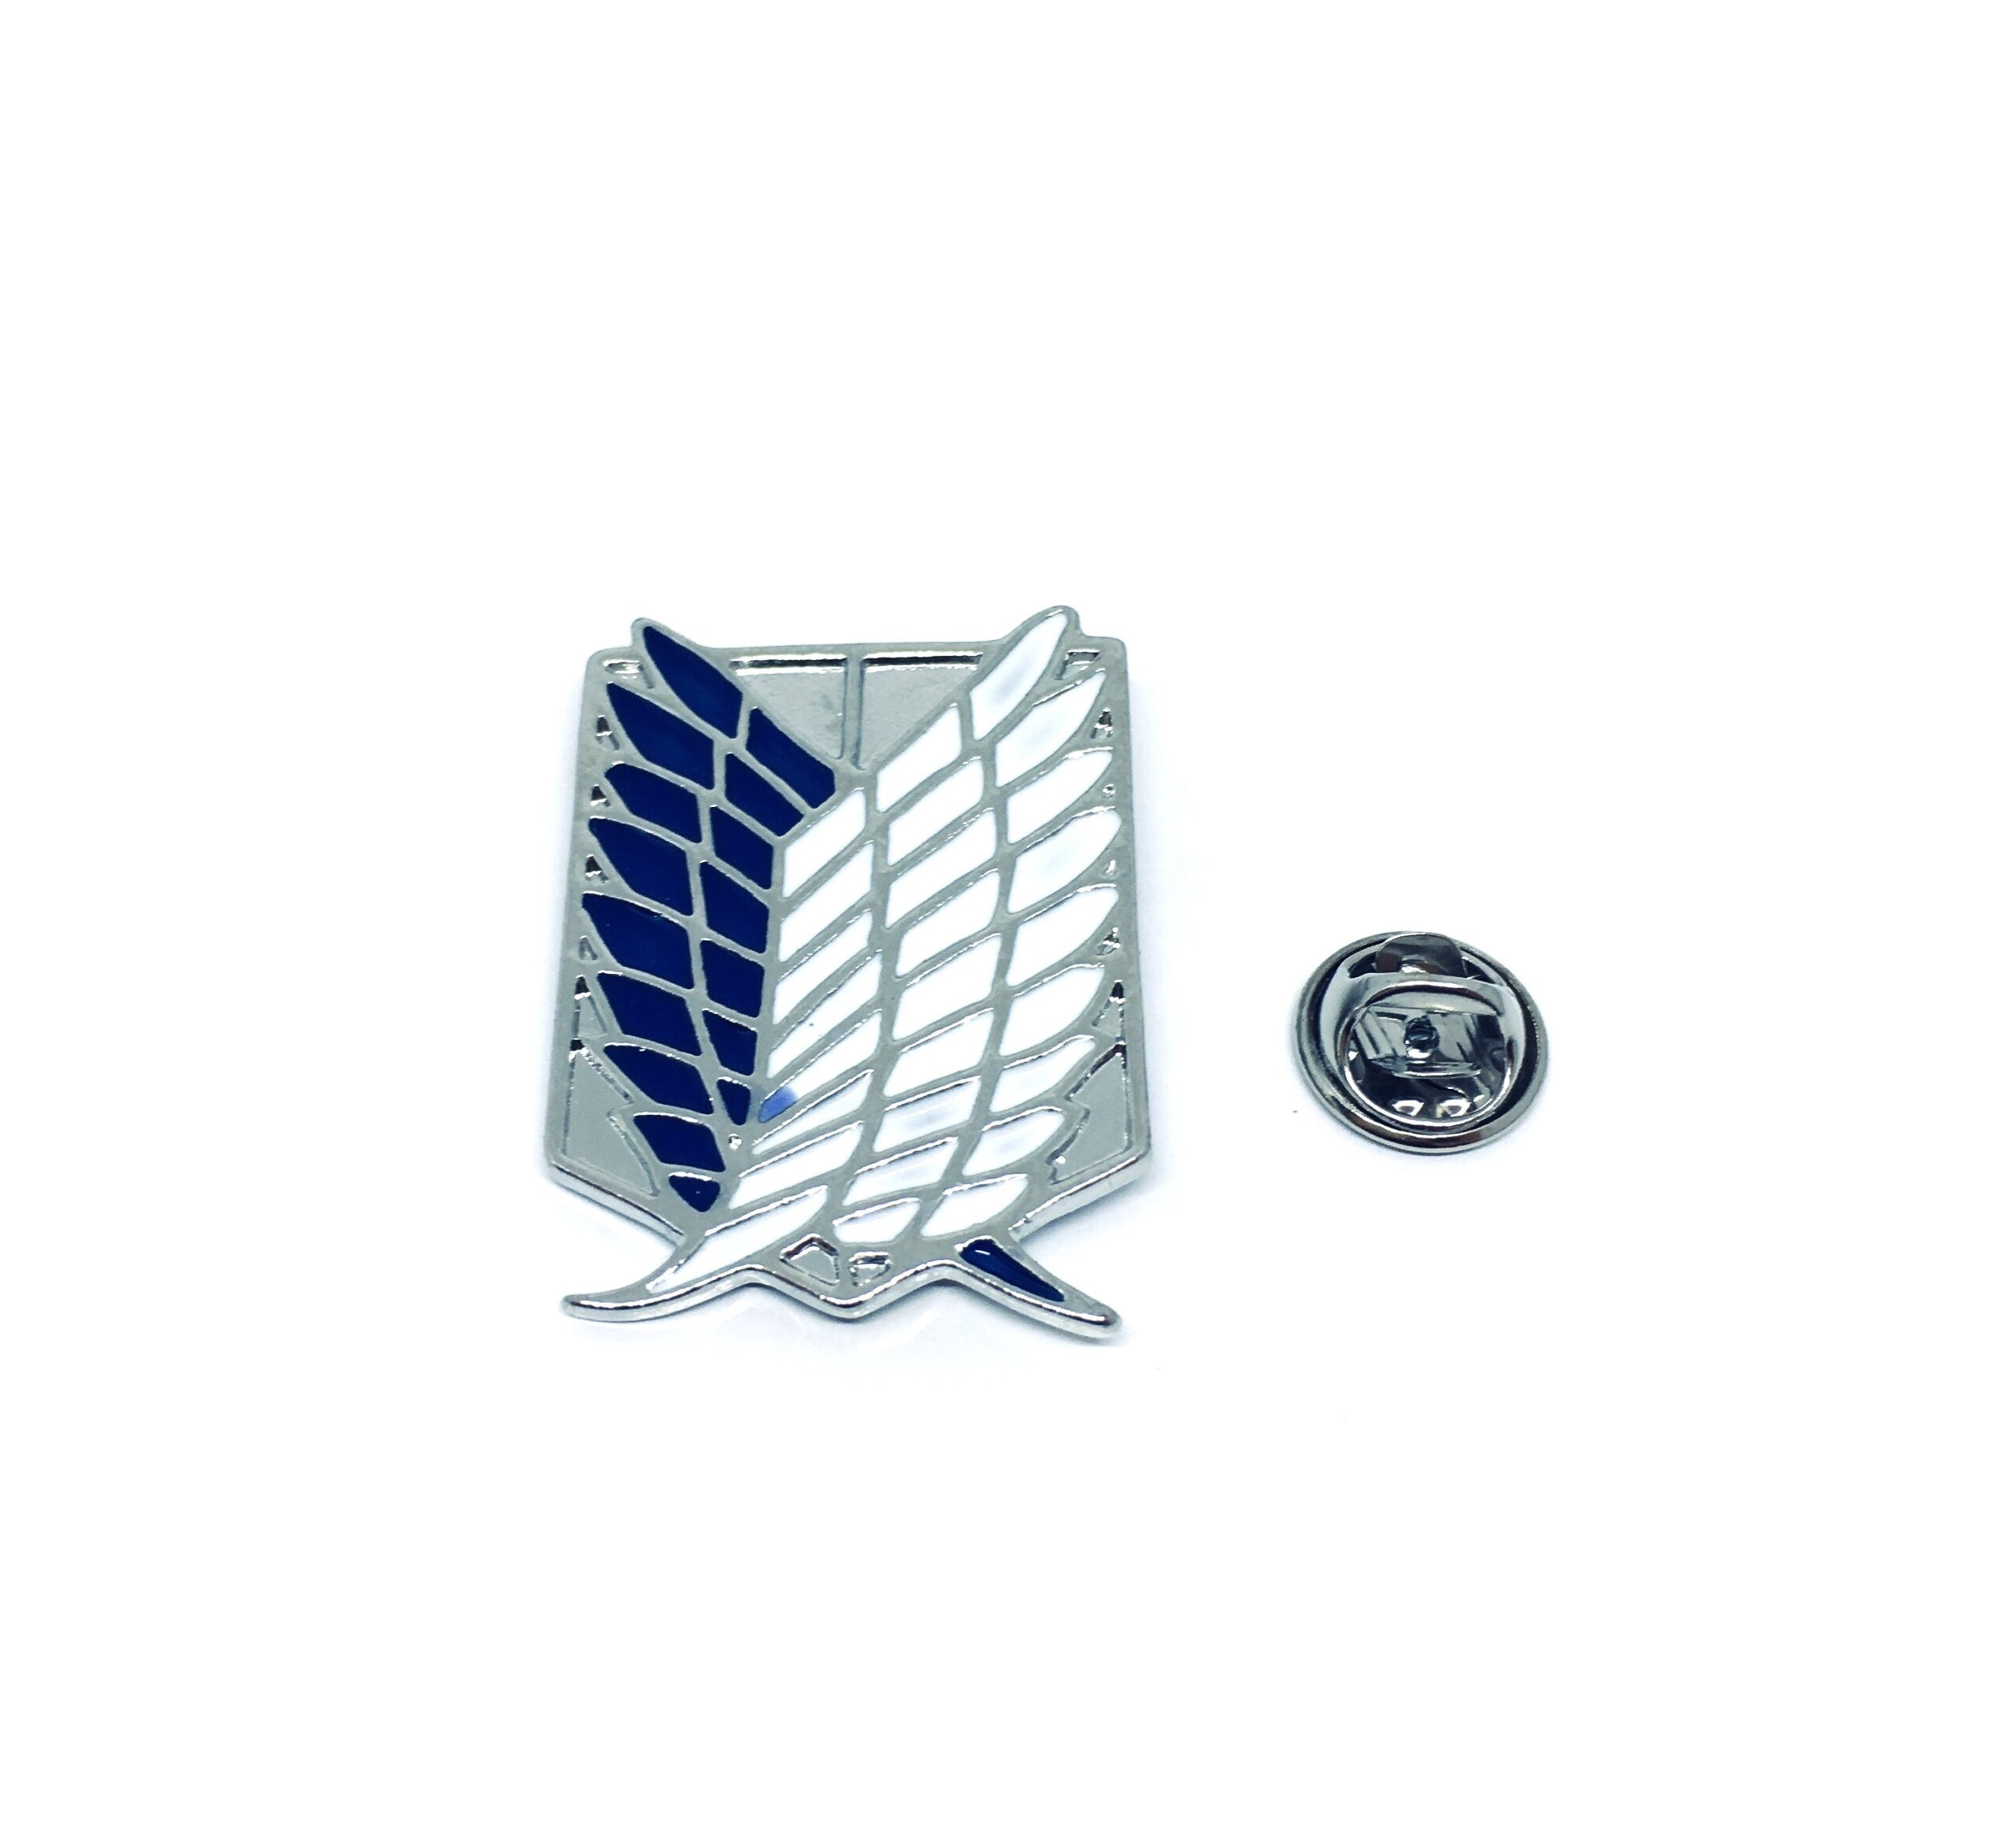 Promotional Gift Attack on Titan Brooch Pin